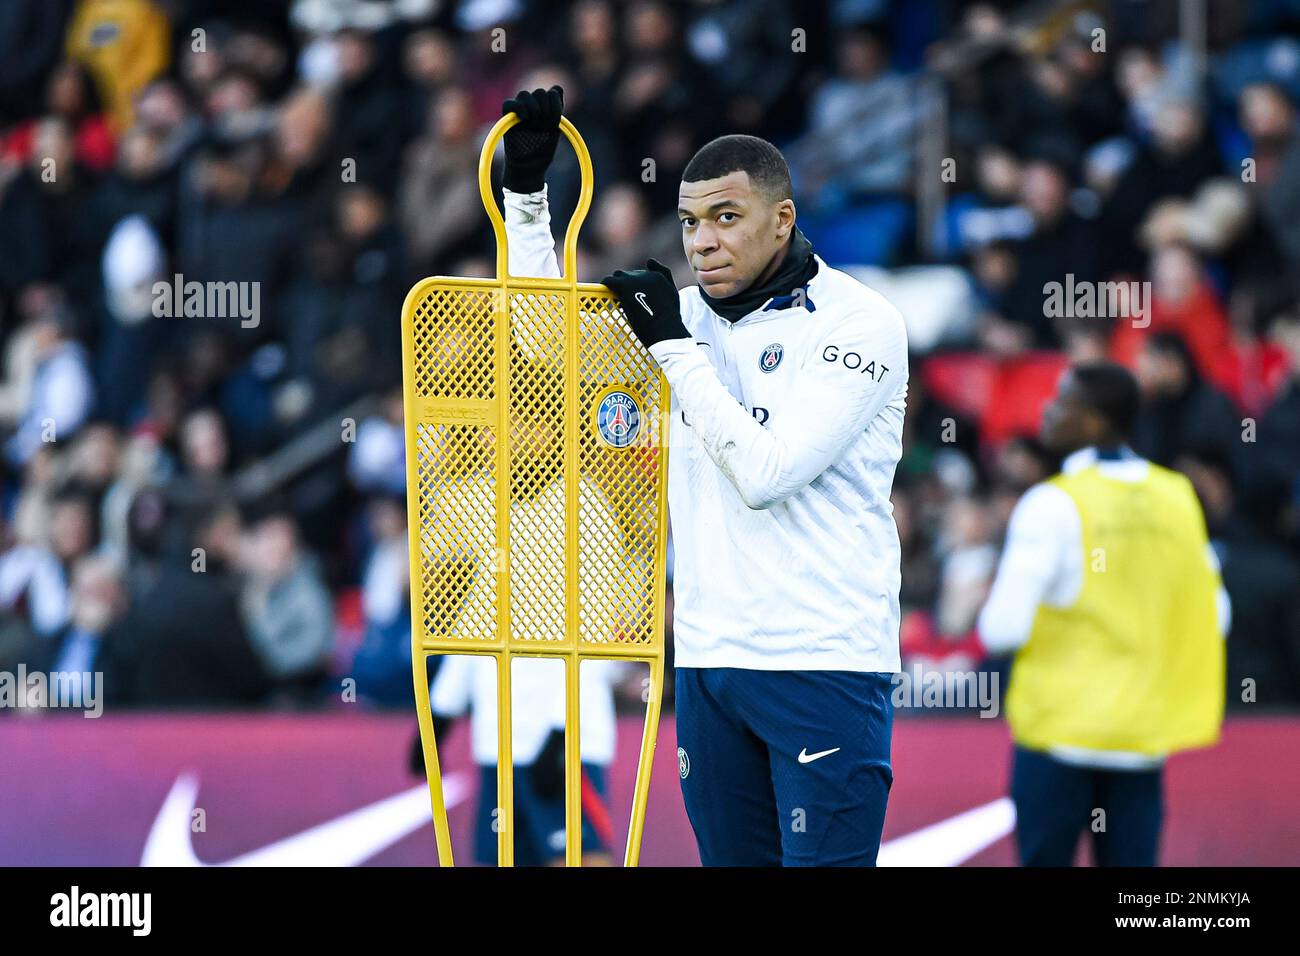 Kylian Mbappe during the public training of the Paris Saint-Germain (PSG) football team on February 24, 2023 at the Parc des Princes stadium in Paris, France. Photo by Victor Joly/ABACAPRESS.COM Stock Photo